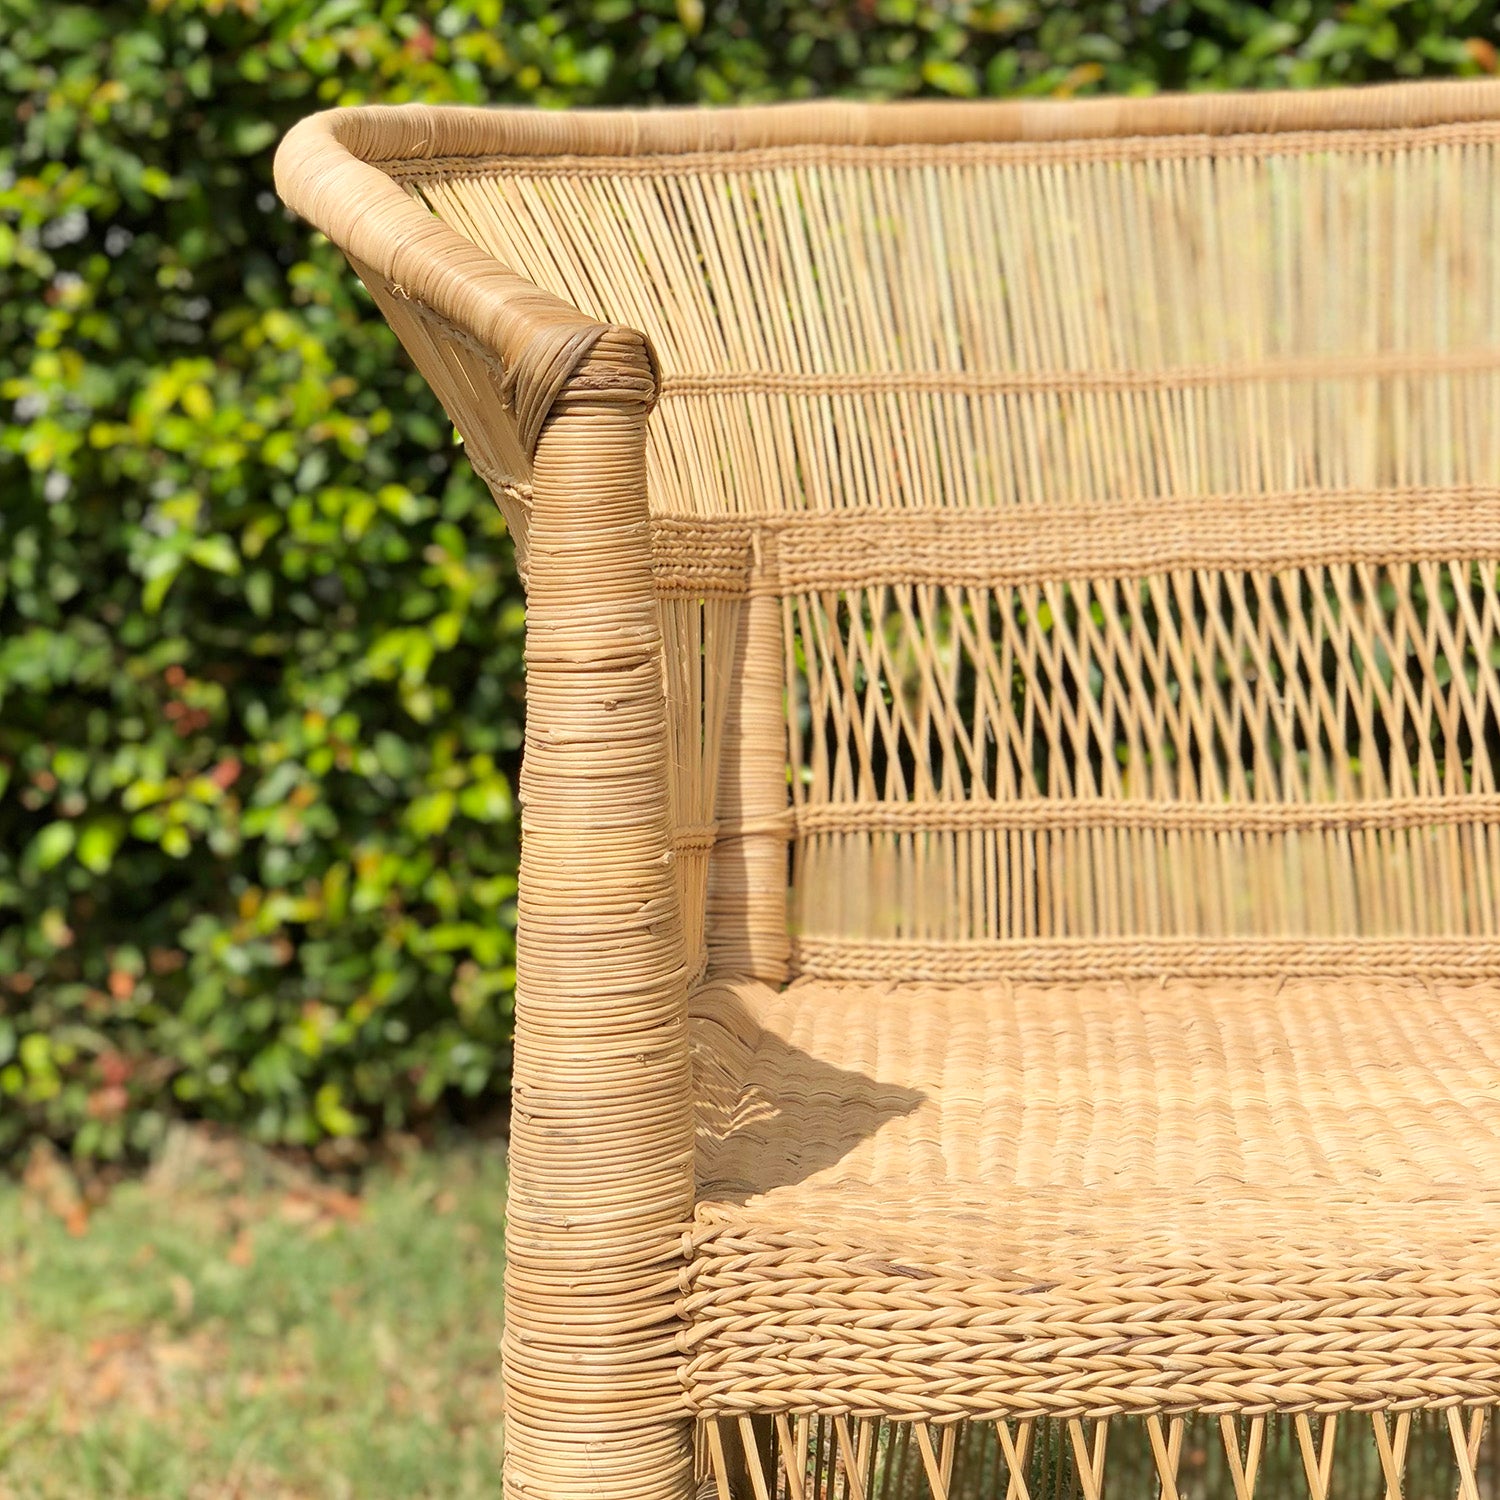 Malawi Furniture Cane Chairs made in Malawi, Hand-woven.